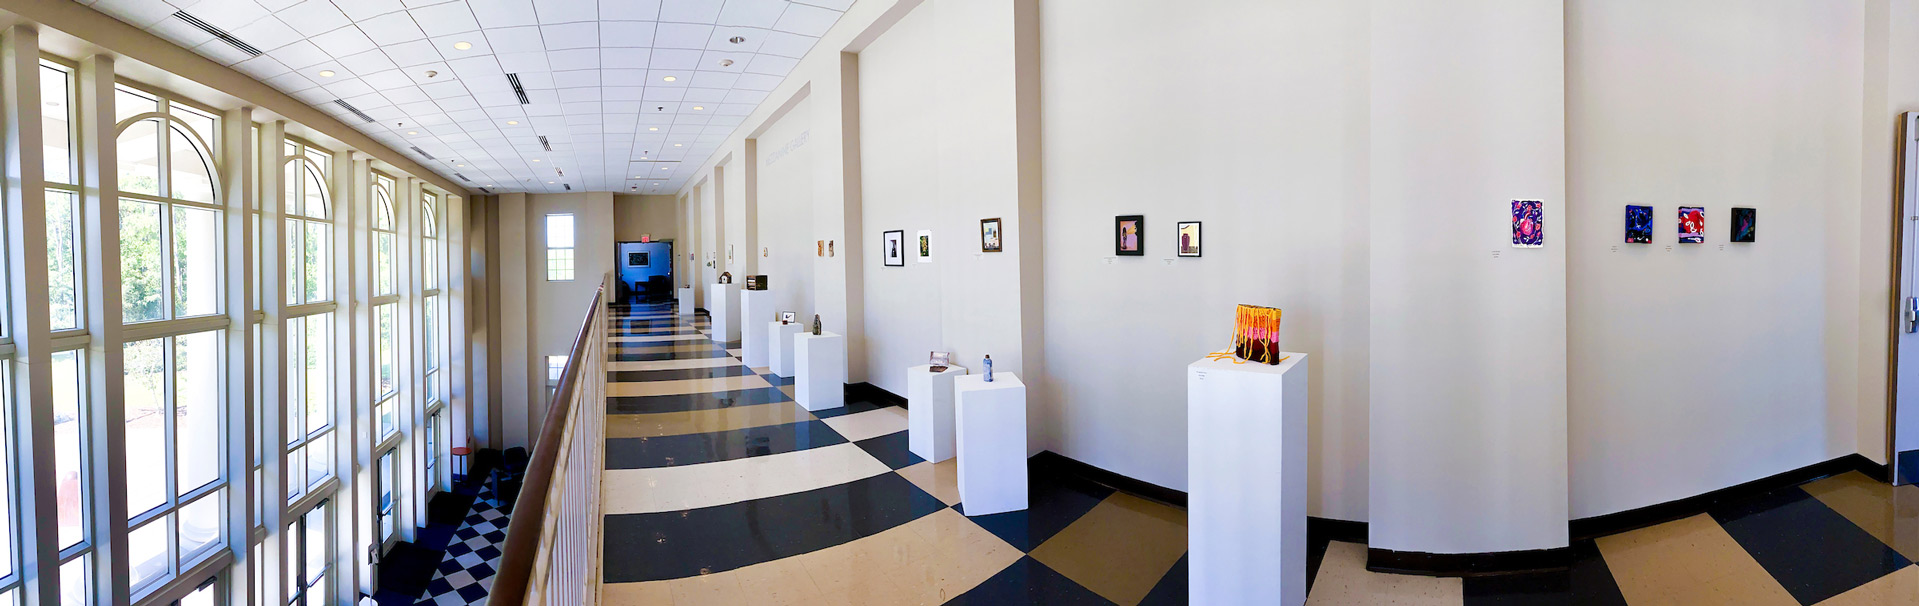 A view of the Mezzanine Art Gallery in the Cultural Arts Building